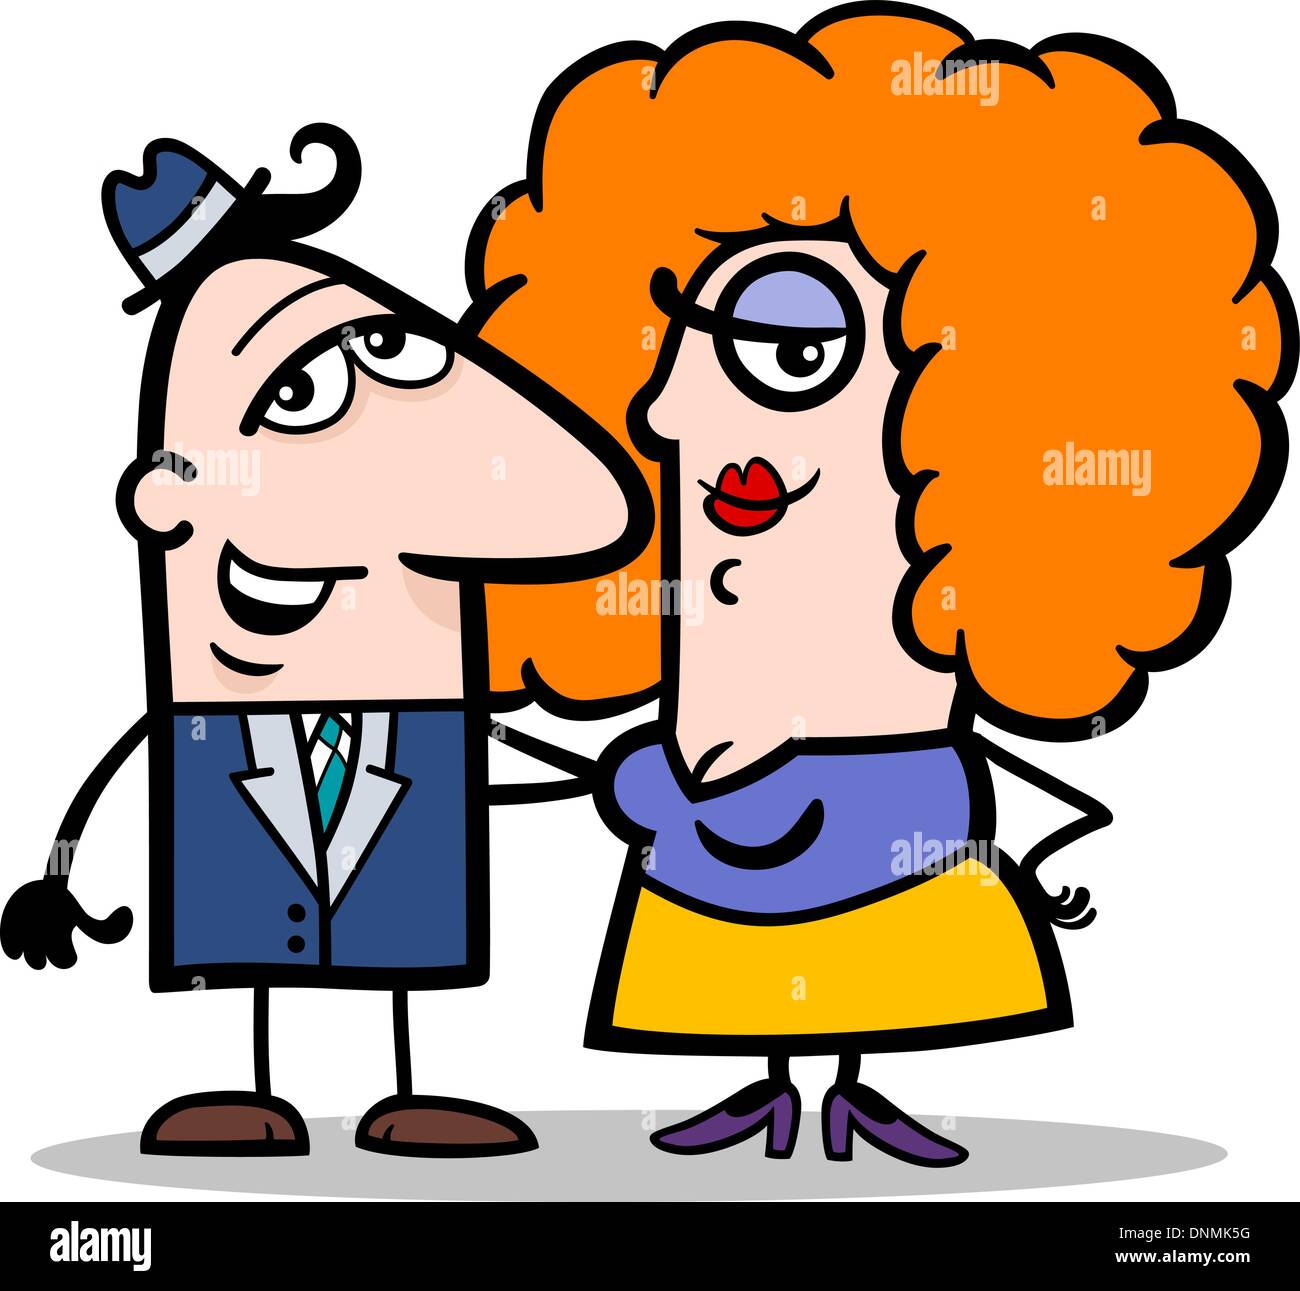 Cartoon Illustration of Funny Man and Woman Couple in Love Stock Vector  Image & Art - Alamy